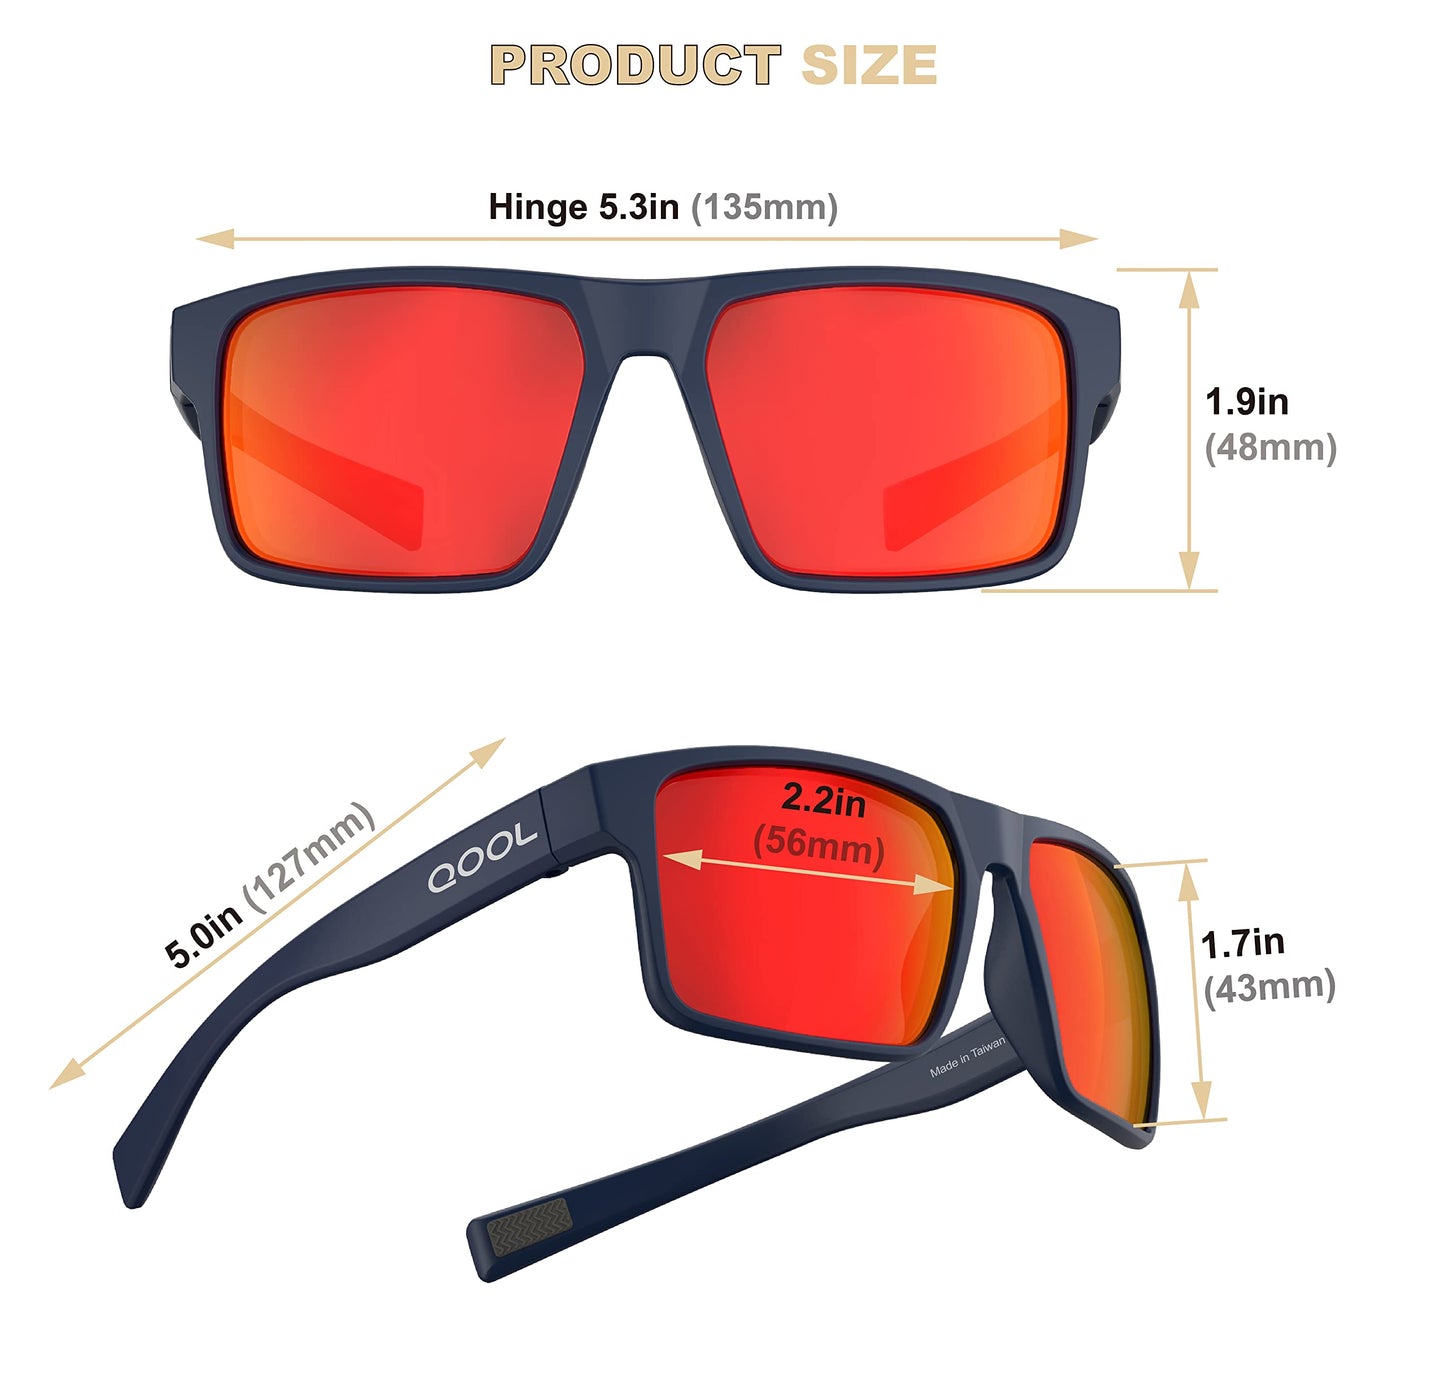 Living out your Qool Time ! Polarized Fish Sunglasses for Men Women, Running Driving Golfing Cycling